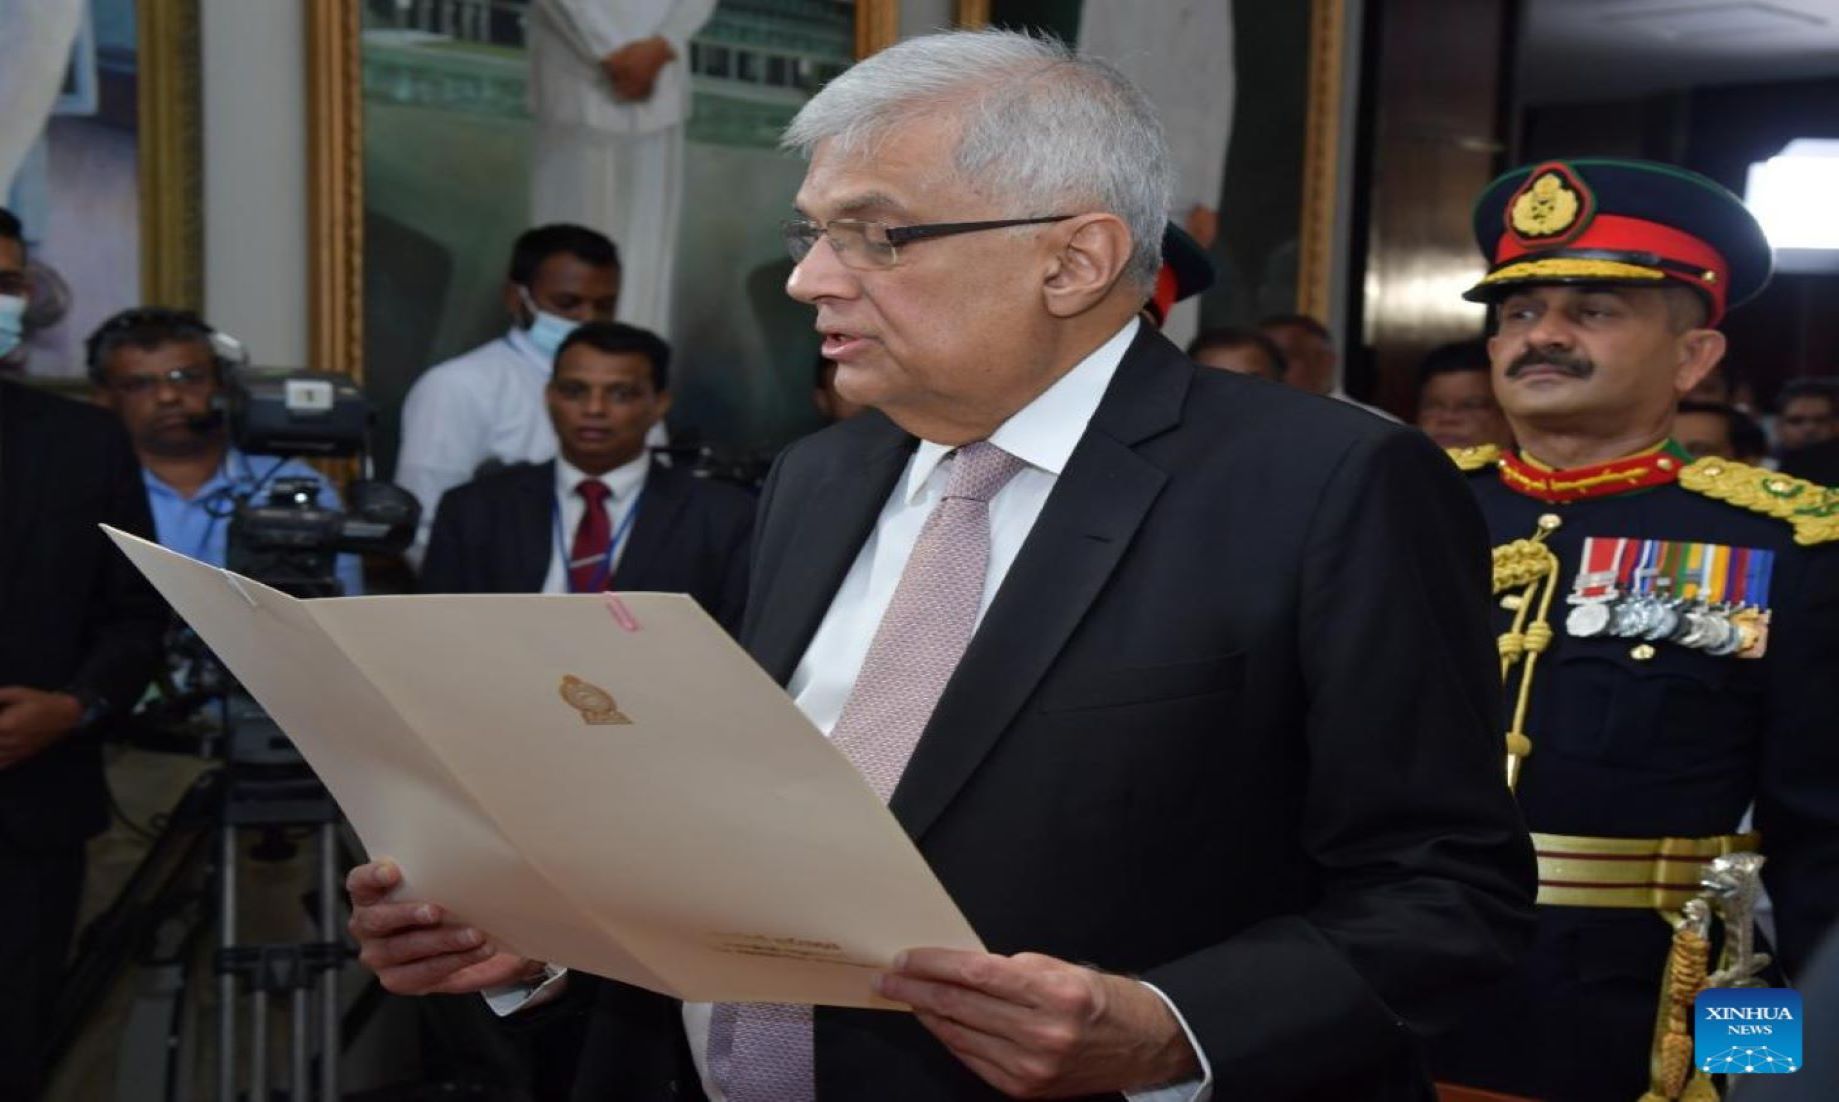 Sri Lanka To Hold Swearing-In Ceremony For New Cabinet Ministers Today